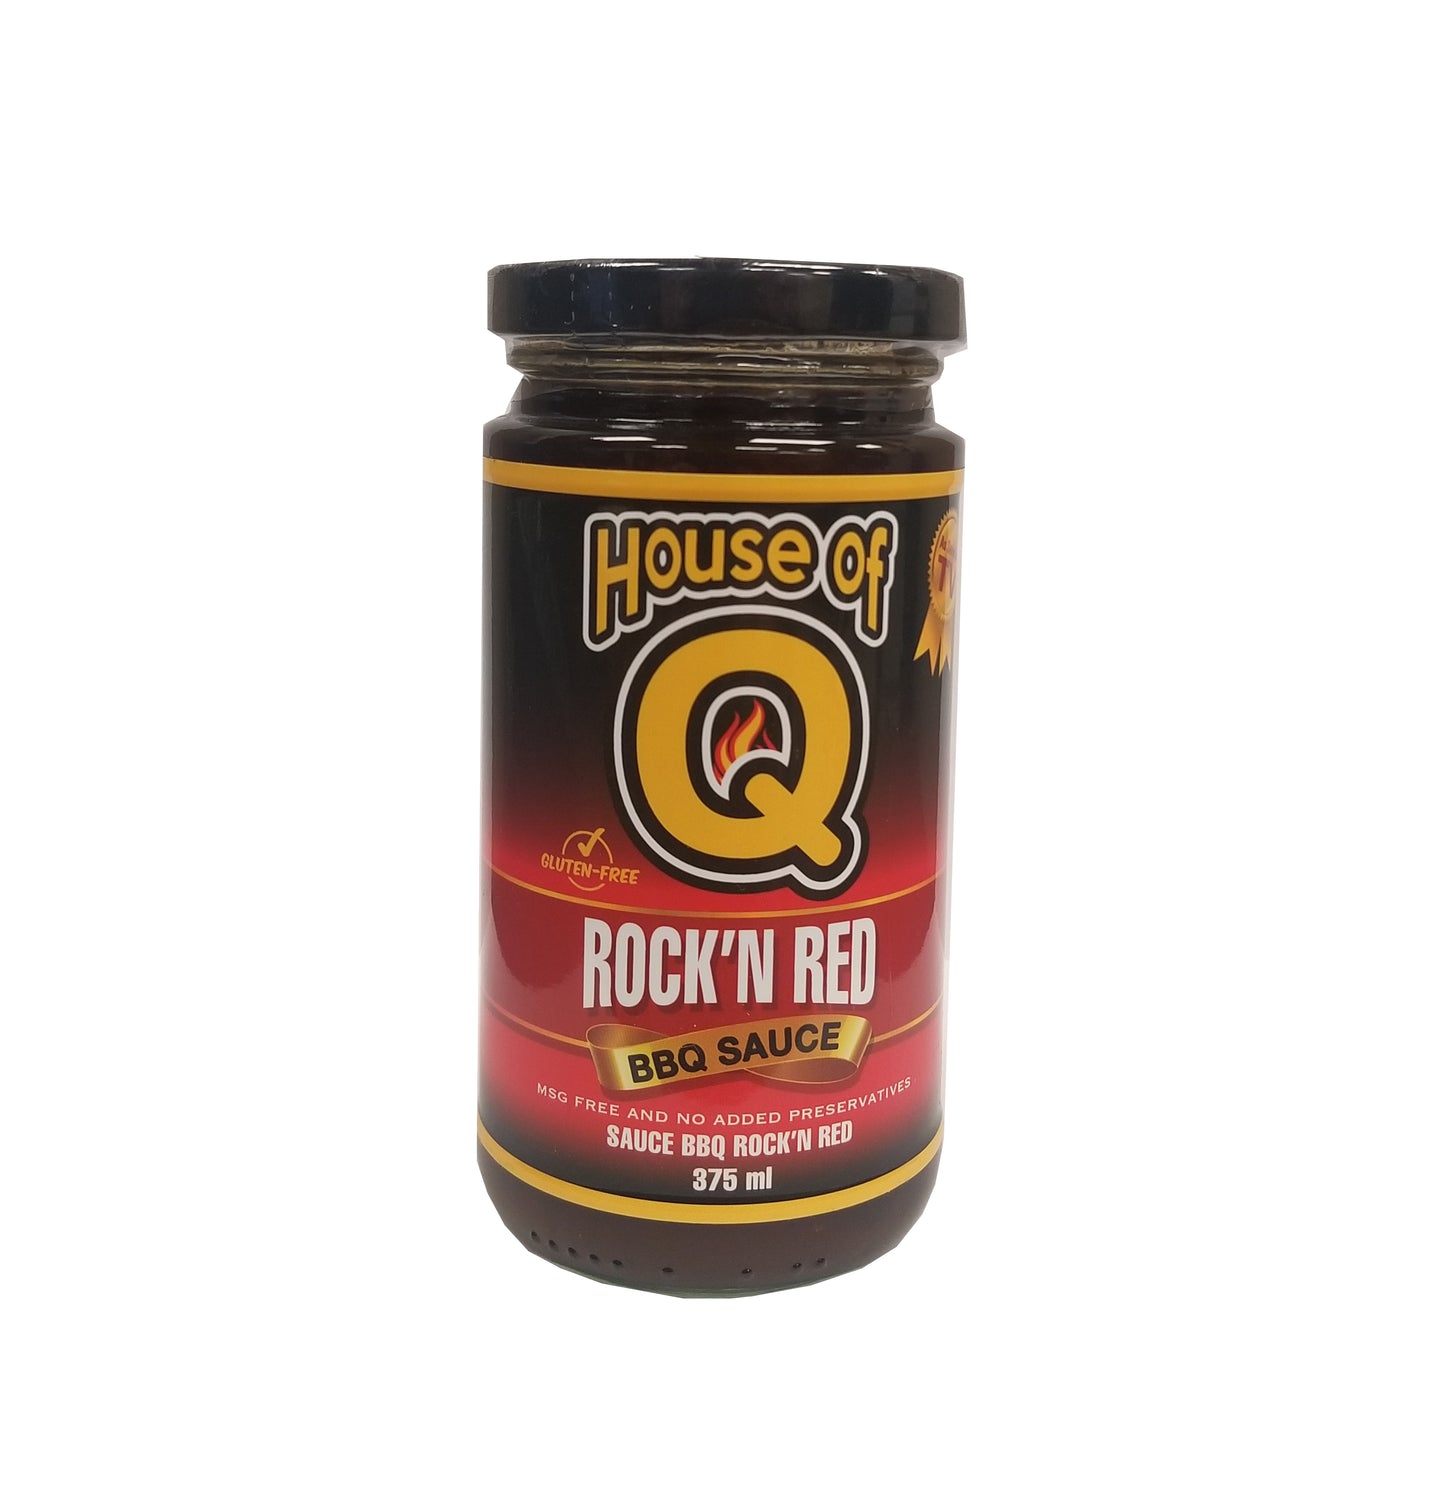 House of Q Rock N' Red BBQ Sauce | Available with Barbecues Galore. Stop by any of our 5 locations for all of your sauce, rubs, and accessory needs. Located in Burlington, Oakville, Etobicoke & Calgary.